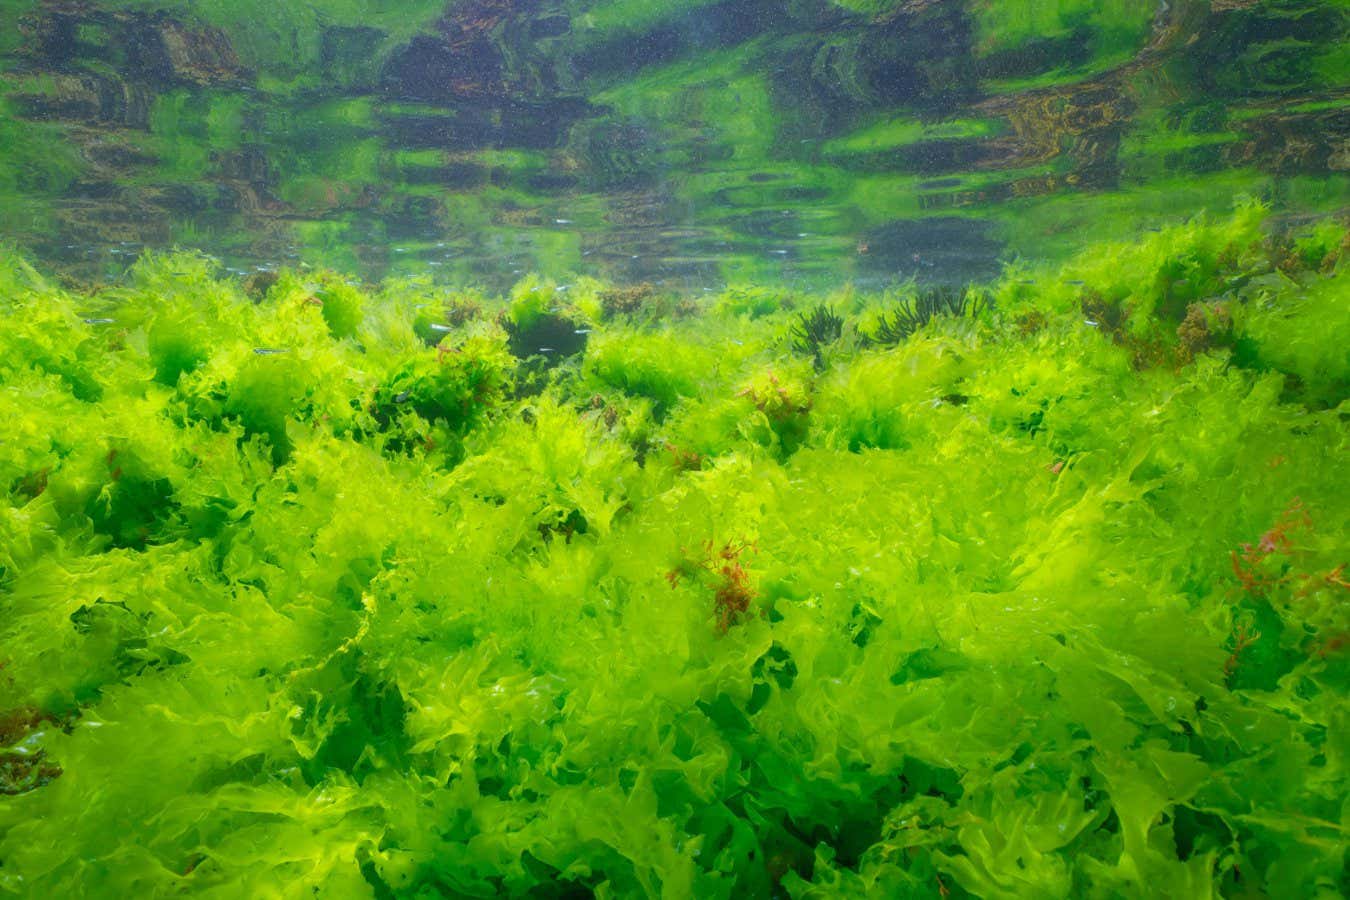 People around Europe have eaten seaweed for thousands of years